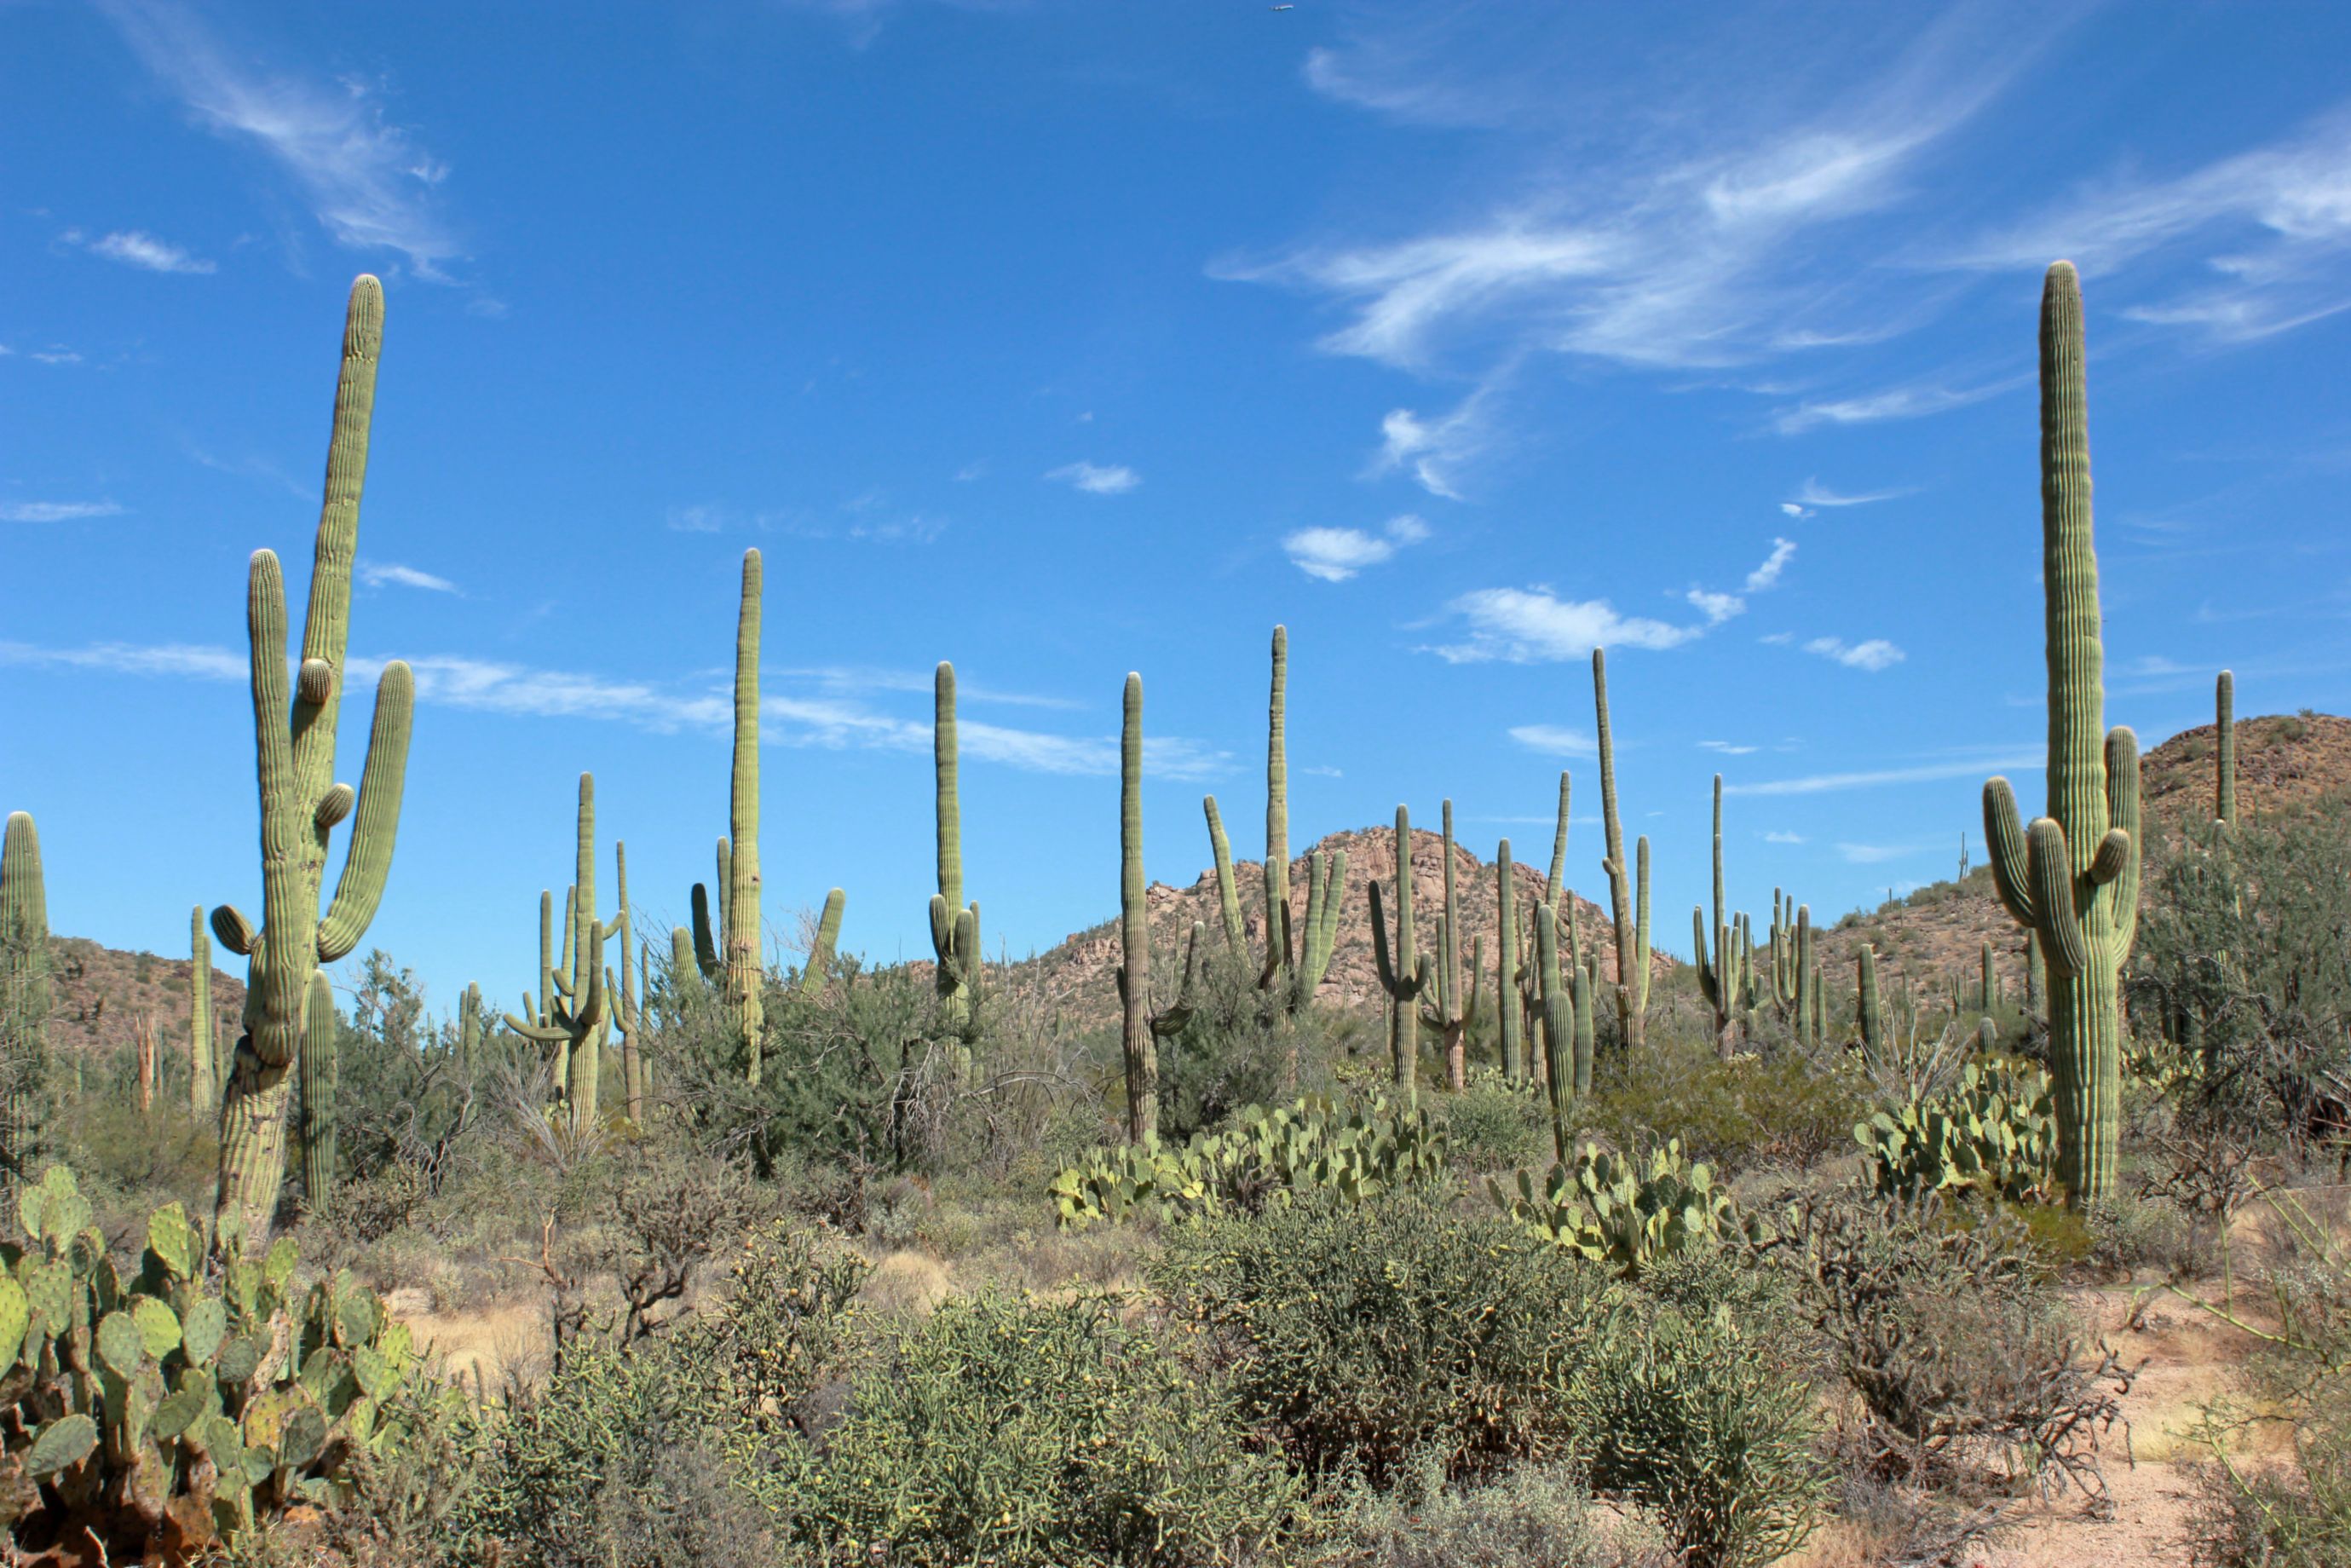 A forest of green cacti against a blue sky